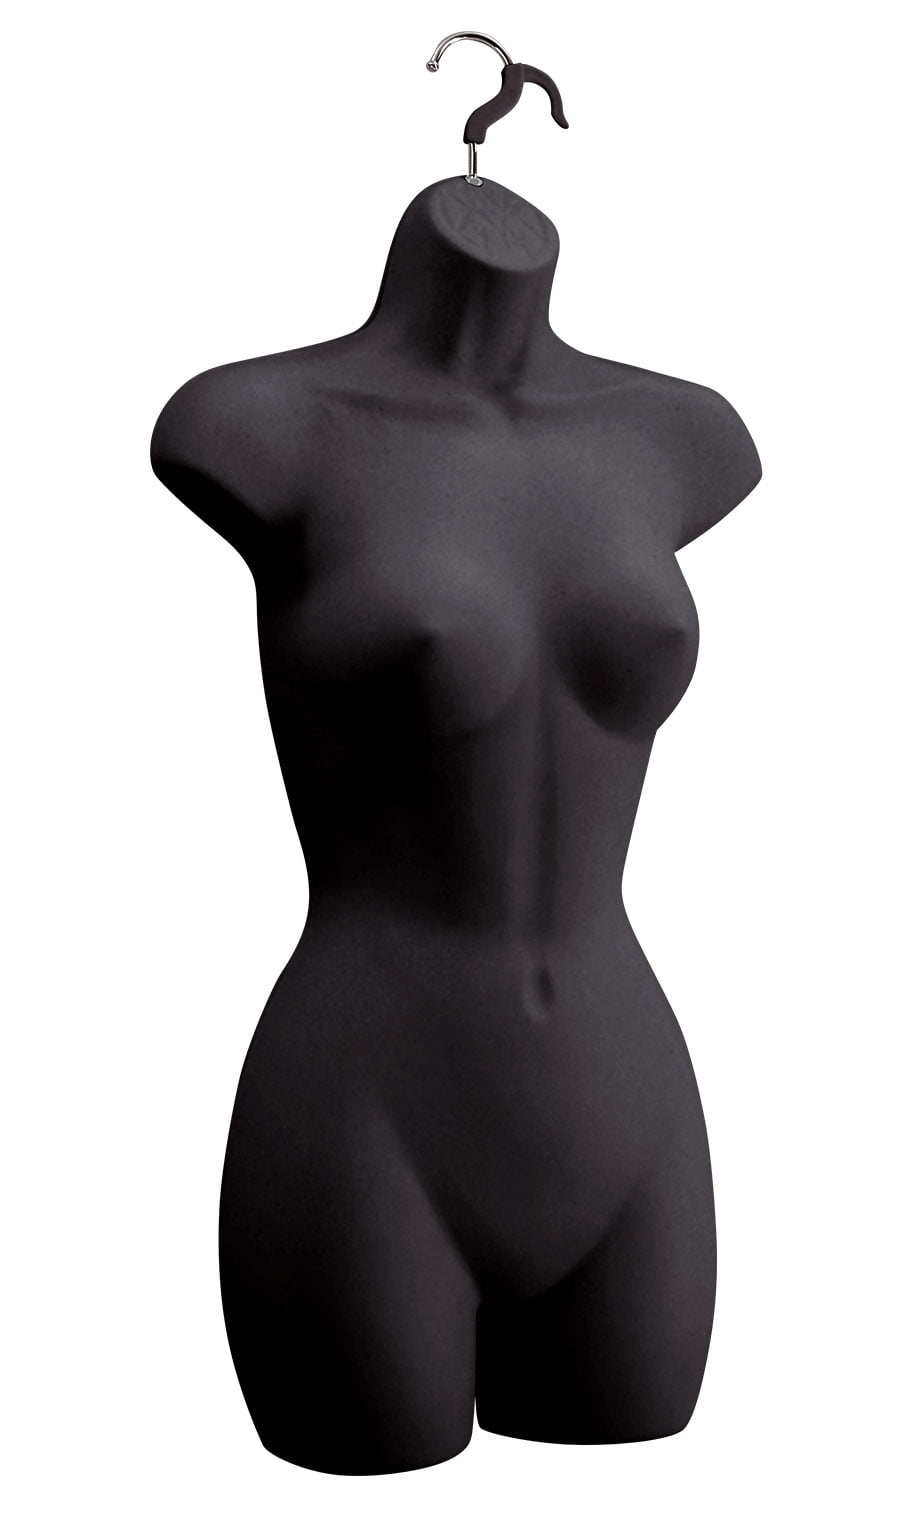 Fits Women’s Sizes 5-10 Female Molded Black Shapely Form with Hook 